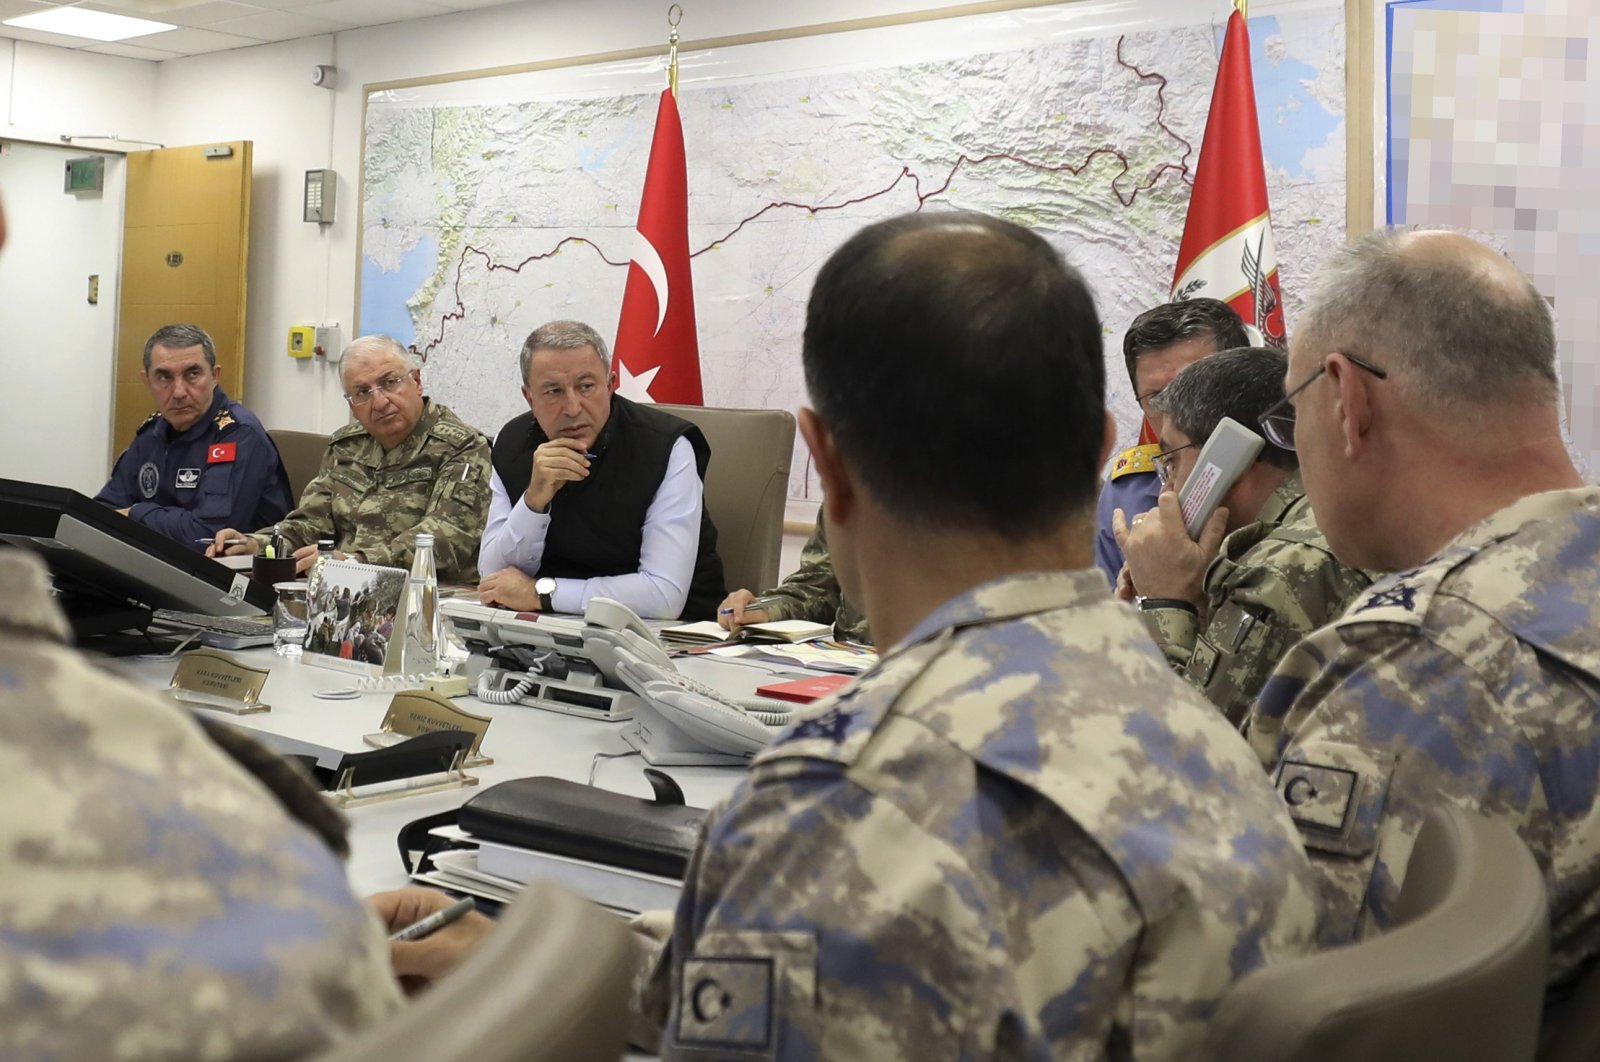 Oct. 9, 2019, Turkey's Defence Minister Hulusi Akar, center, with Turkish army's top commanders in an operation room at the army headquarters, in Ankara, Turkey. (Photo: Turkish Defense Ministry)